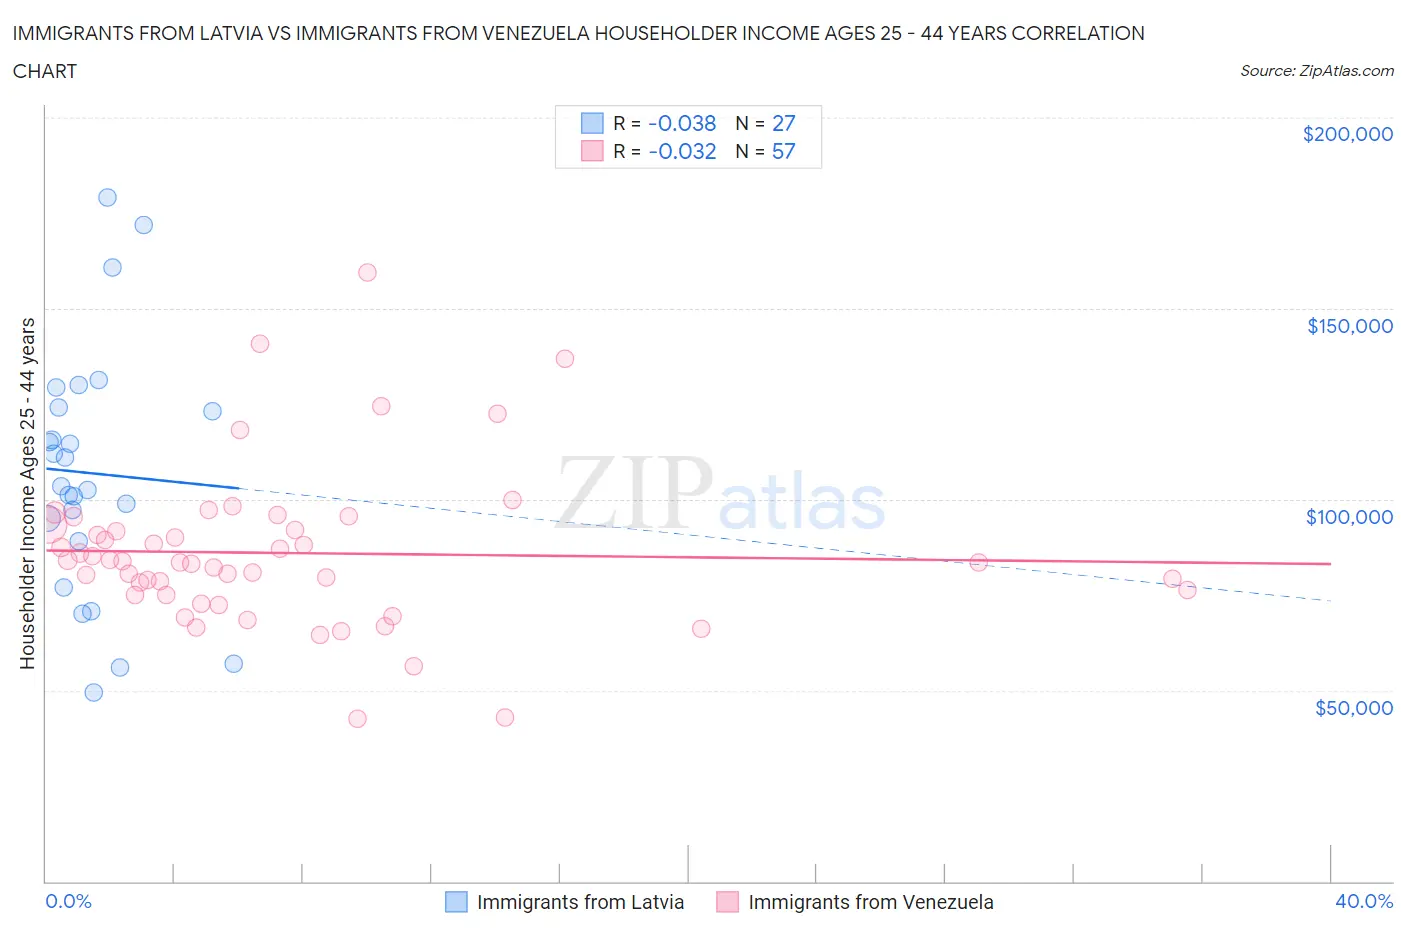 Immigrants from Latvia vs Immigrants from Venezuela Householder Income Ages 25 - 44 years